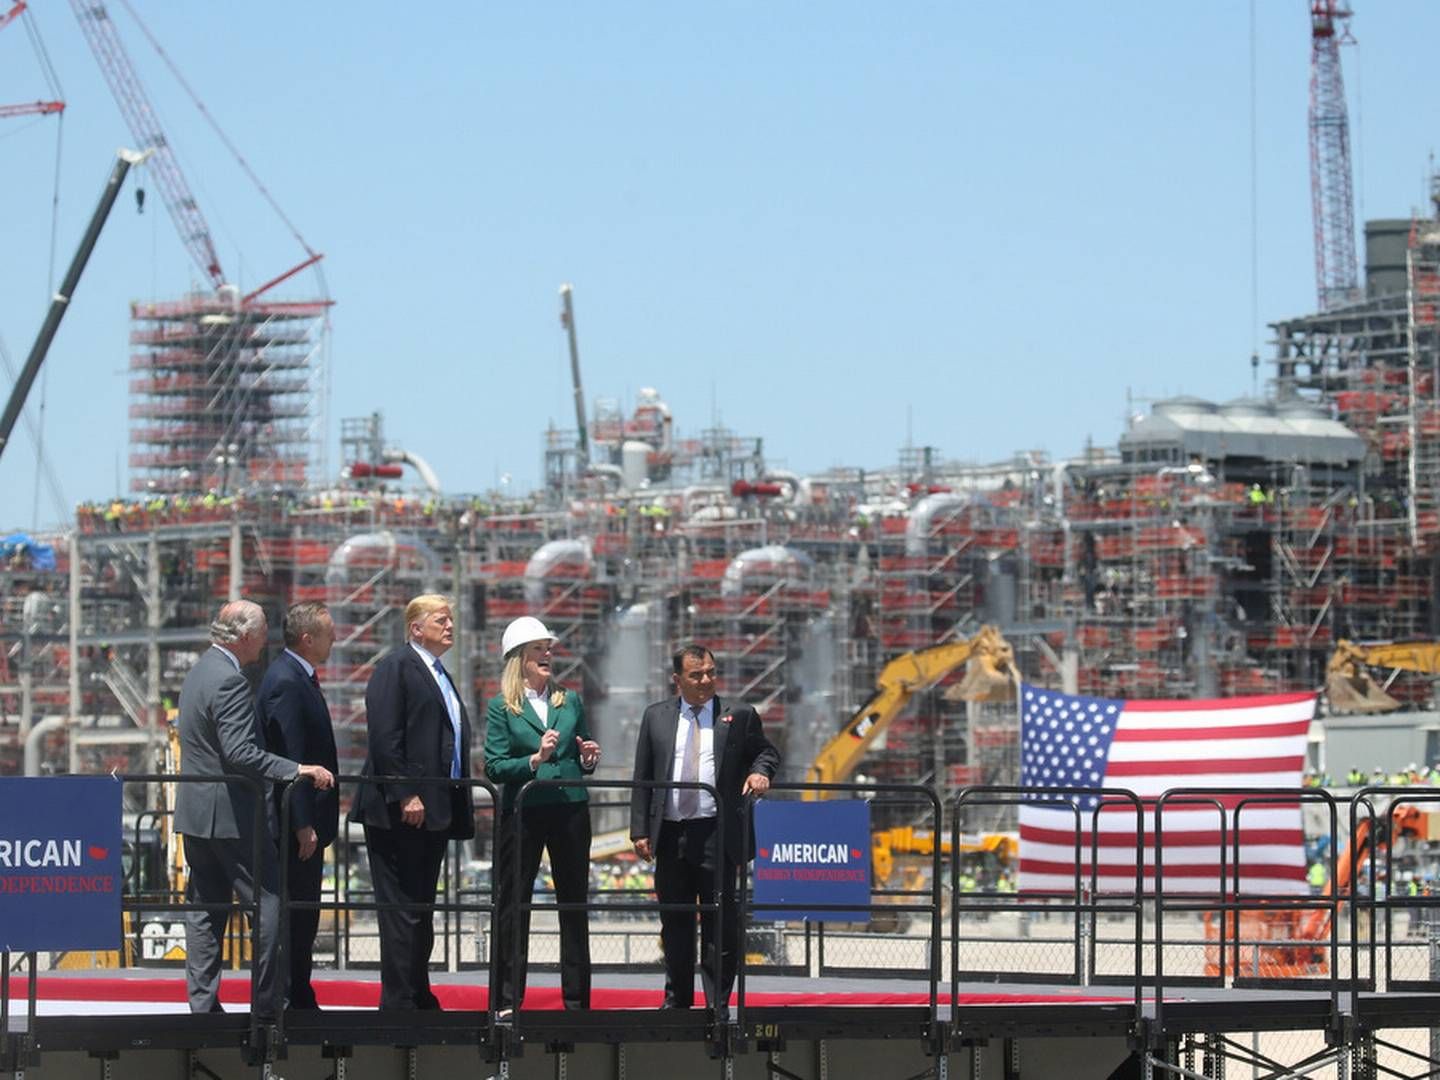 In May, US President Donald Trump visited LNG terminal Cameron LNG in Hackberry, Louisiana. The US may celebrate the country's large LNG export, which is seizing market shares from traditional European market players. | Photo: Leah Millis/Reuters/Ritzau Scanpix